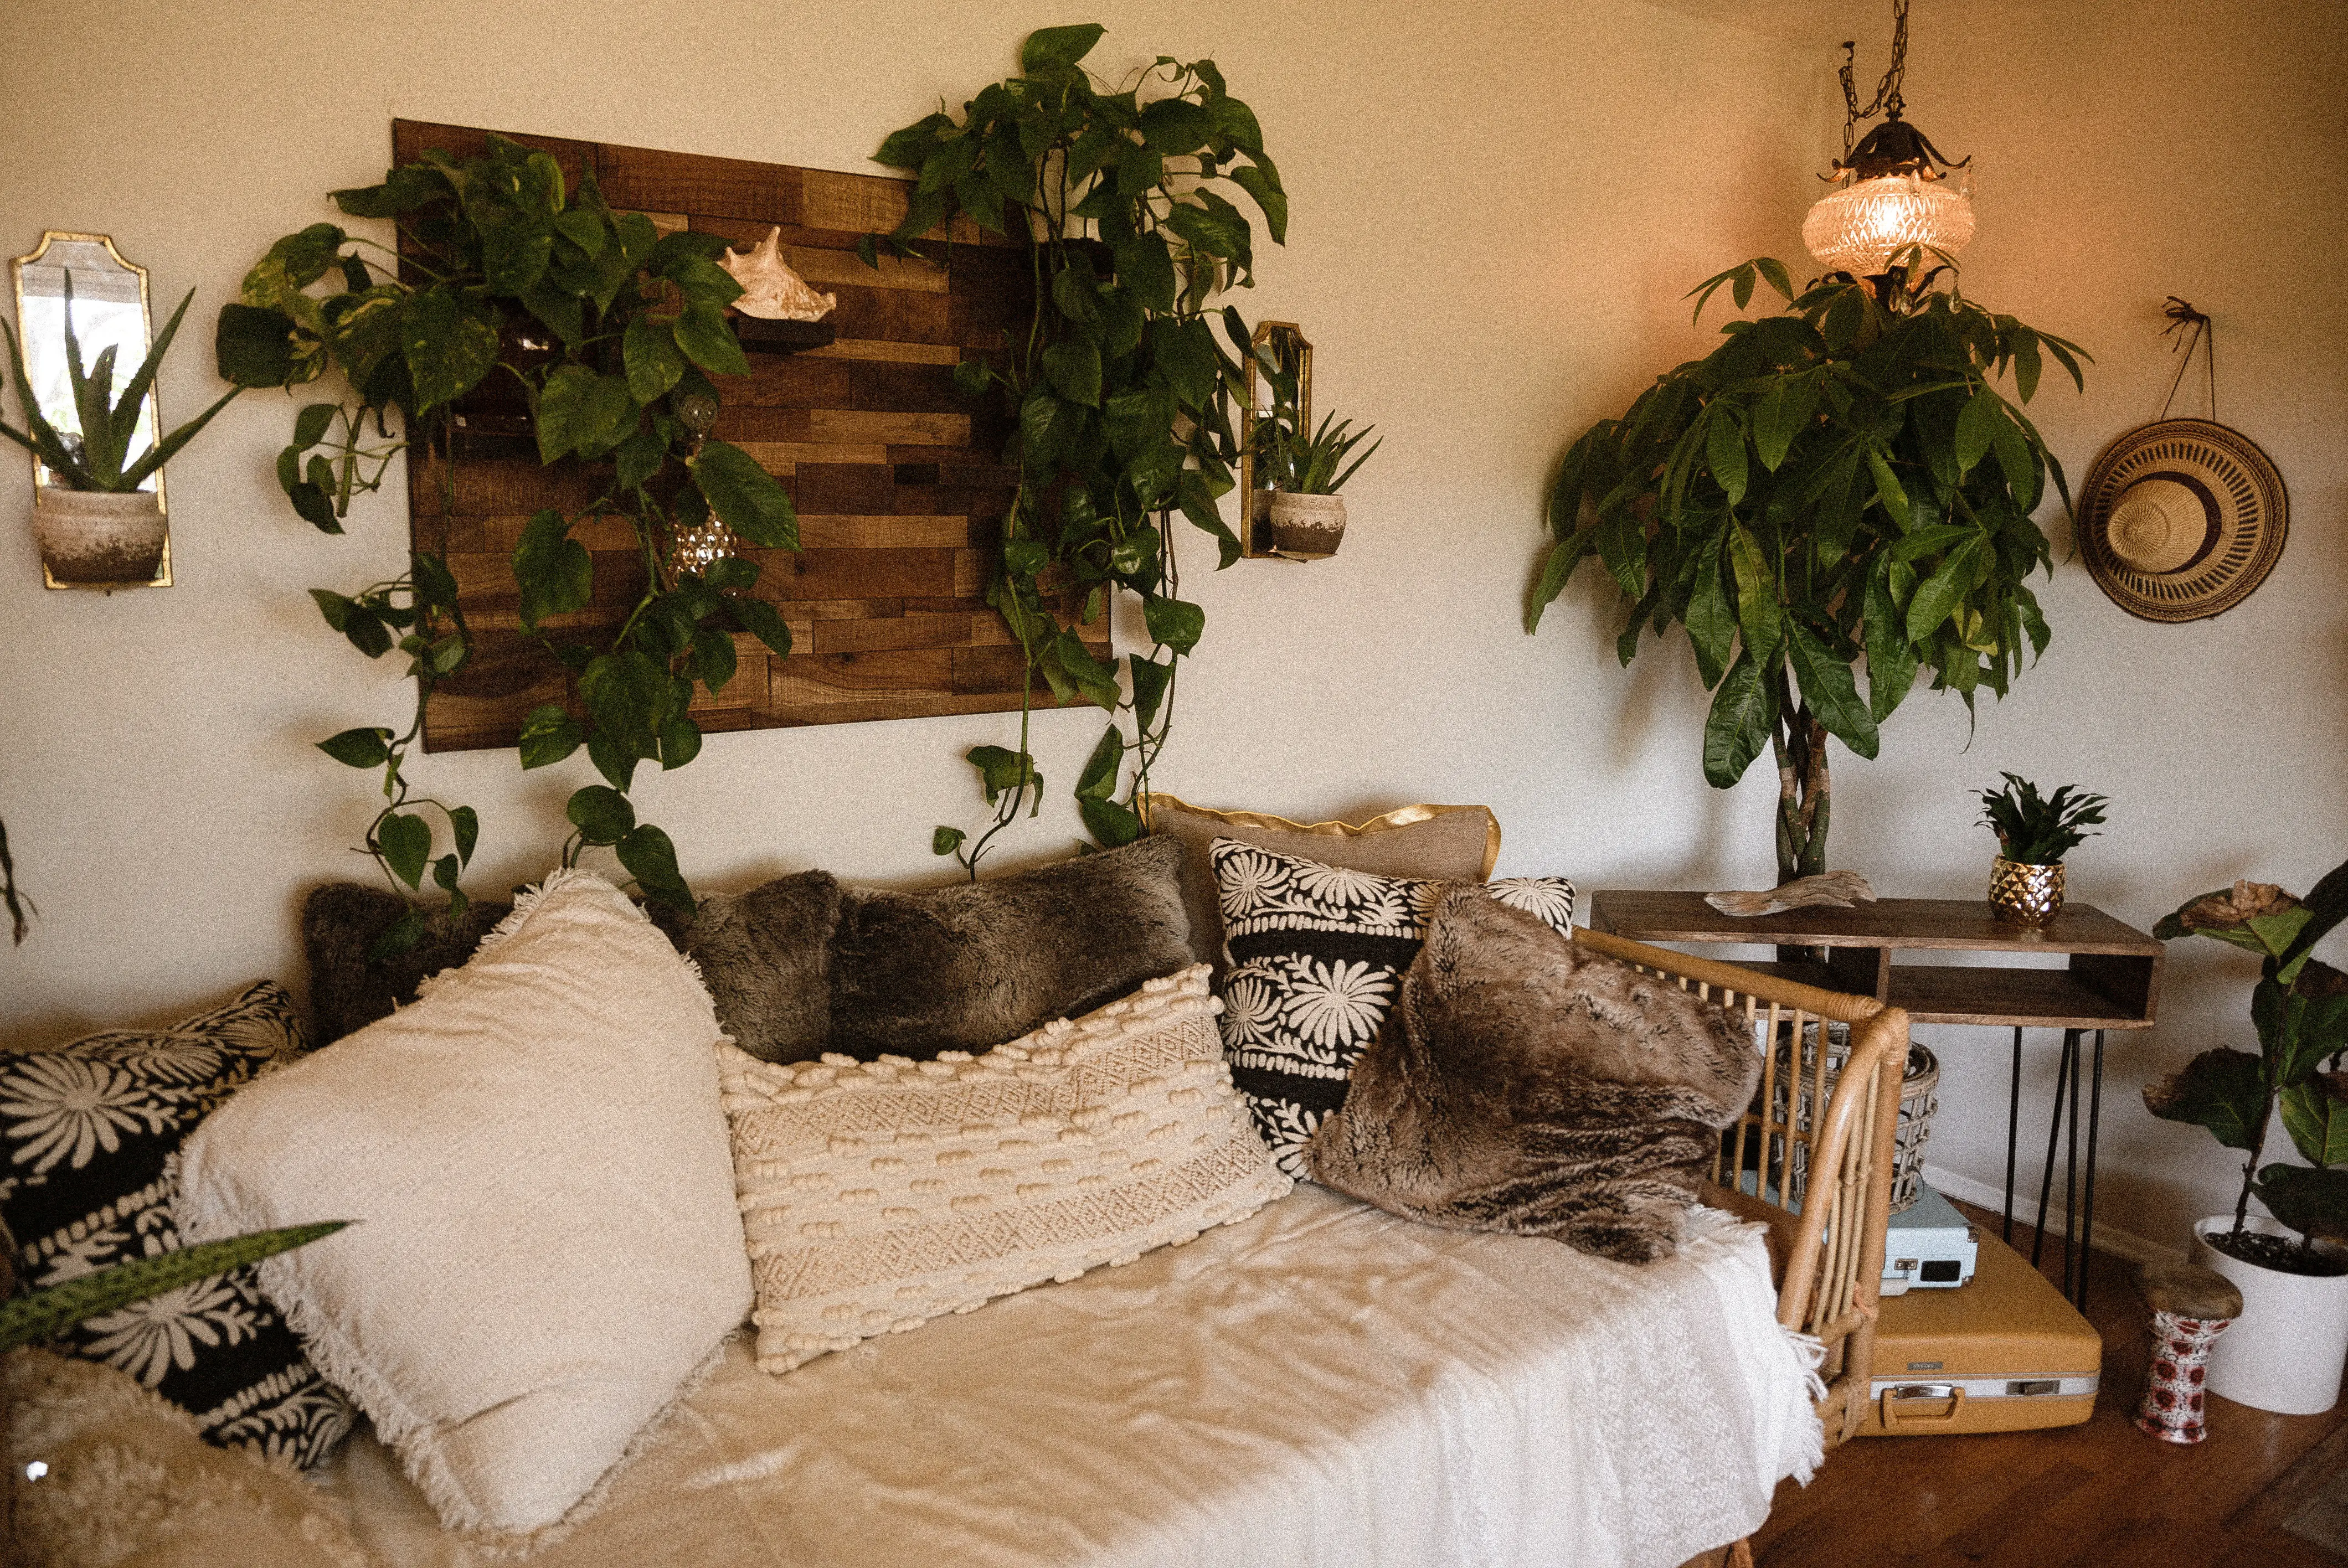 5 Ways to Turn Your Home Into a Cozy Oasis